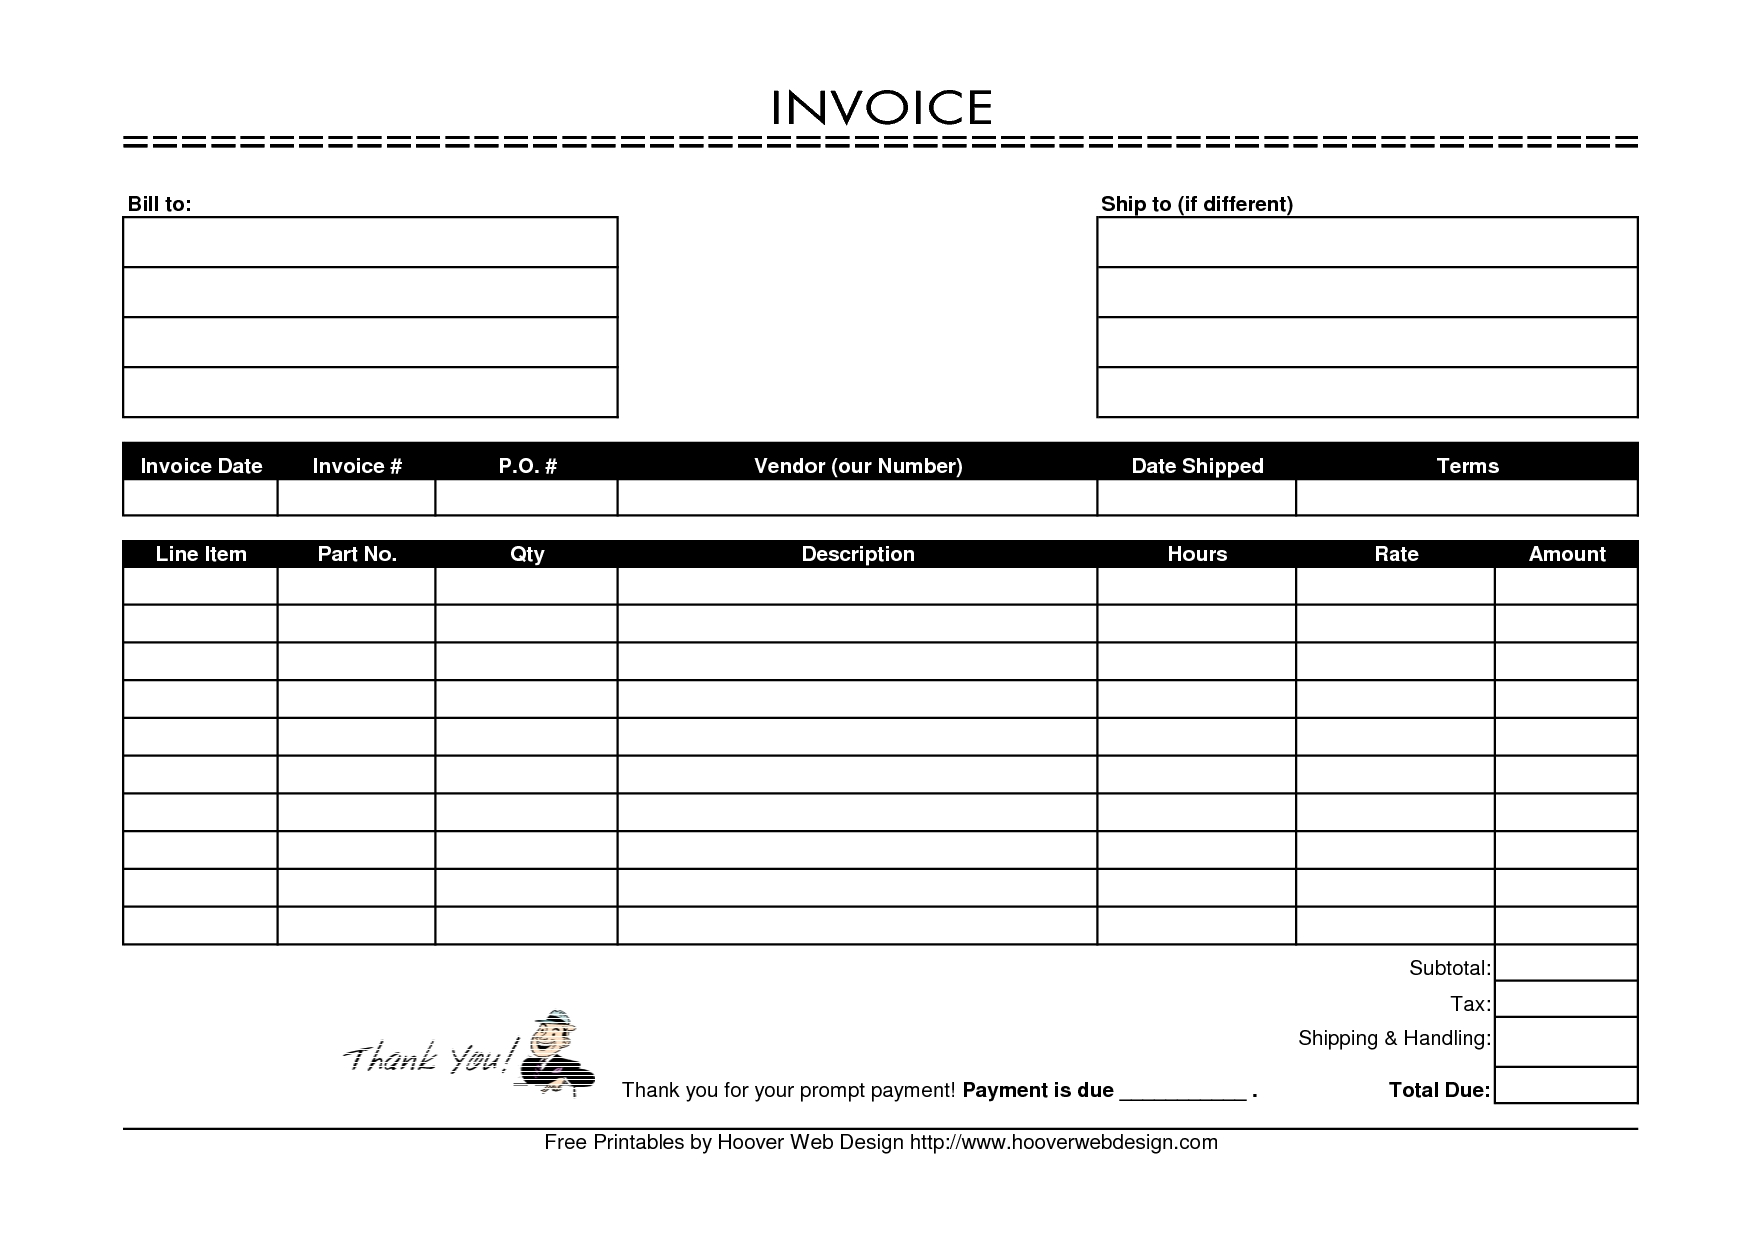 free printable invoice template 9 examples of printable invoice template and steps to create 1754 X 1240